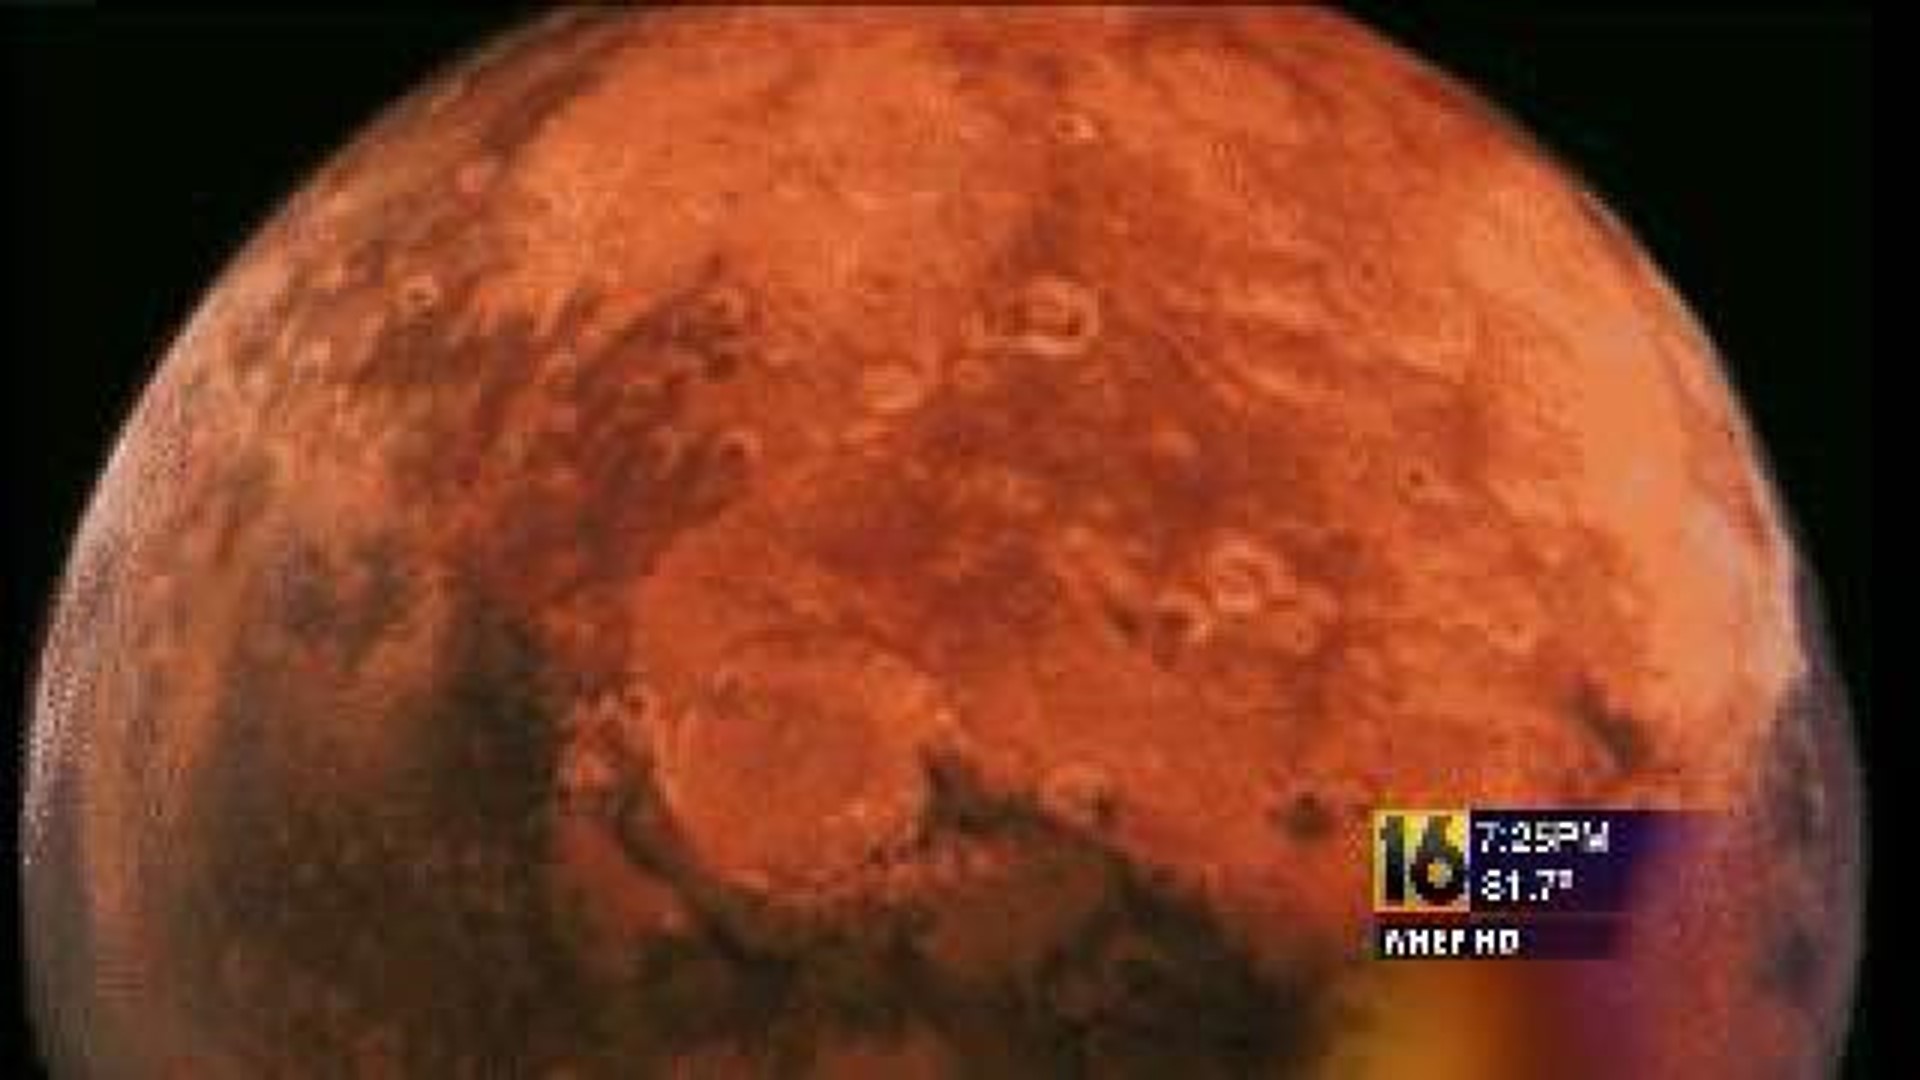 Why is Mars Red?